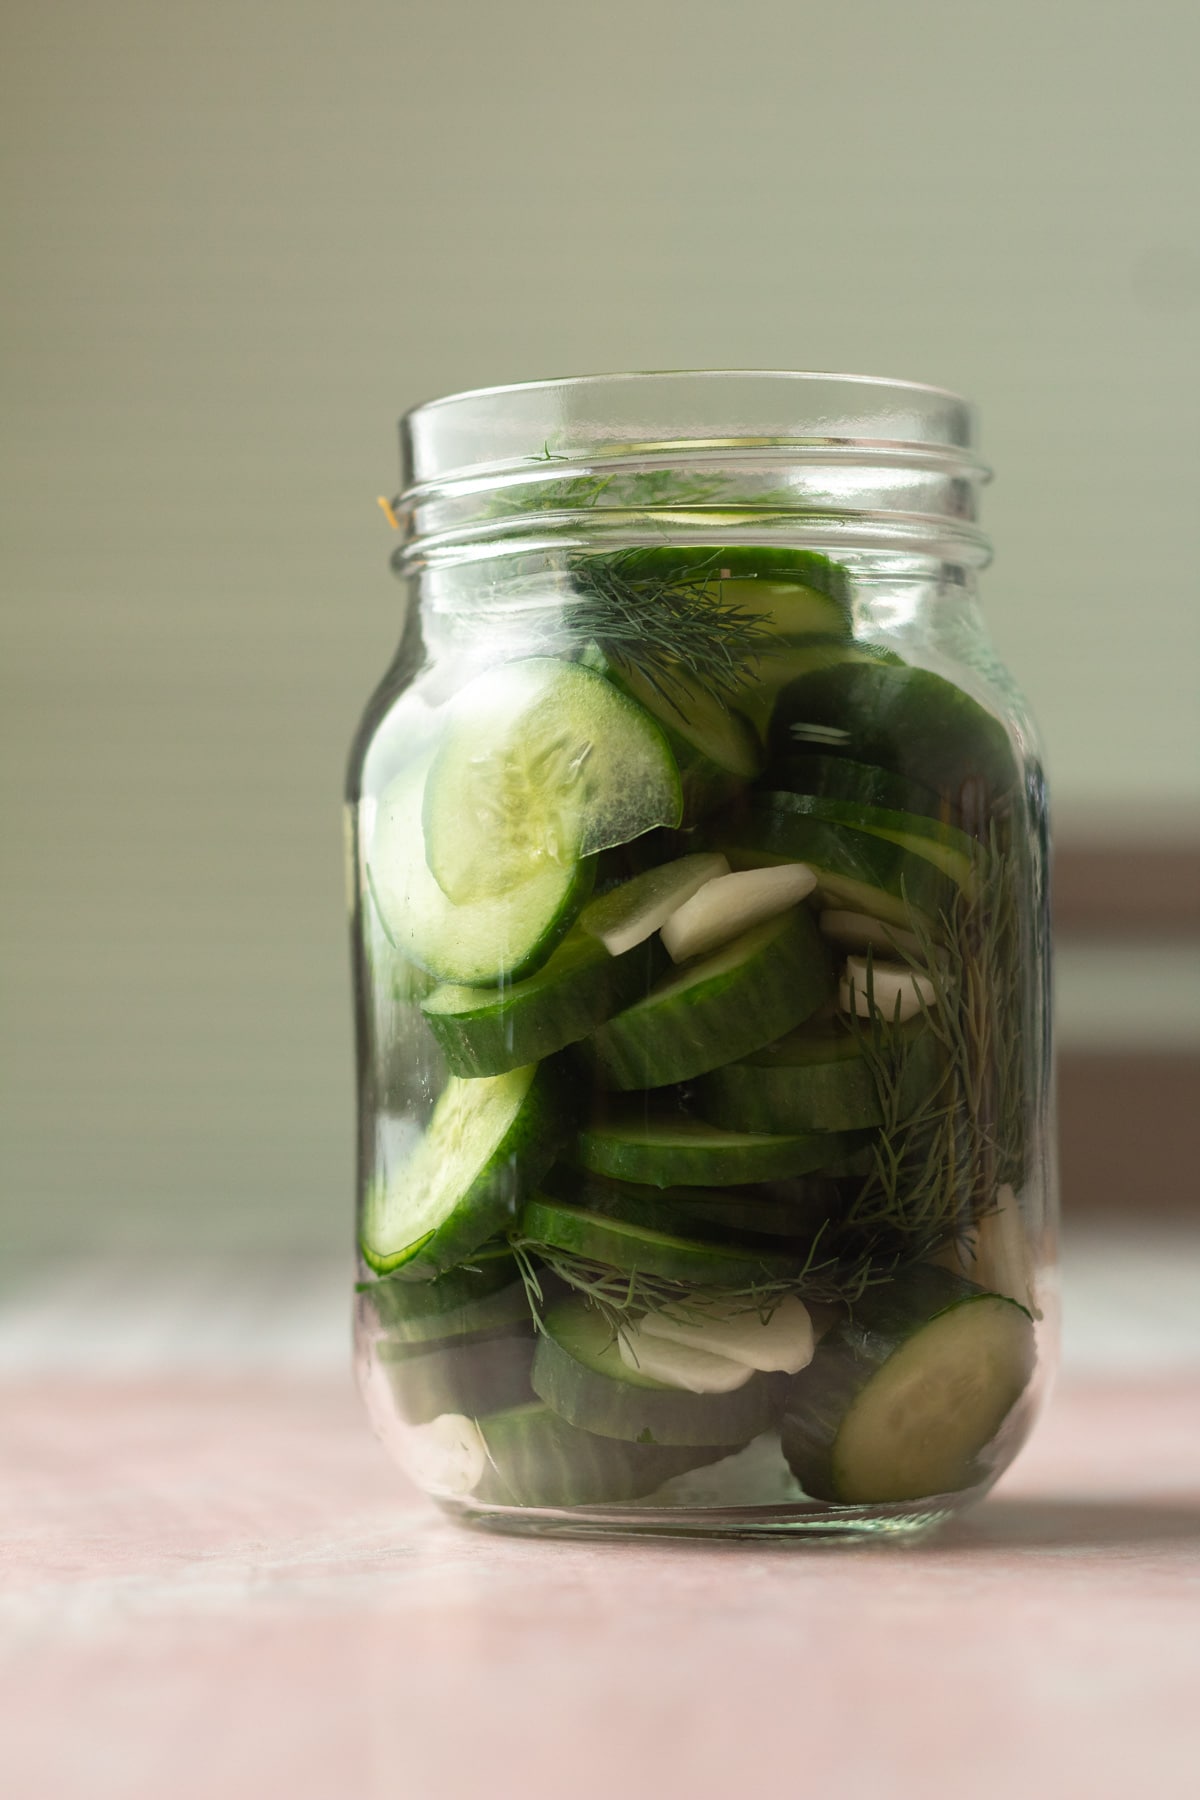 Jar with sliced cucumbers, dill and garlic for refrigerator dill pickles.